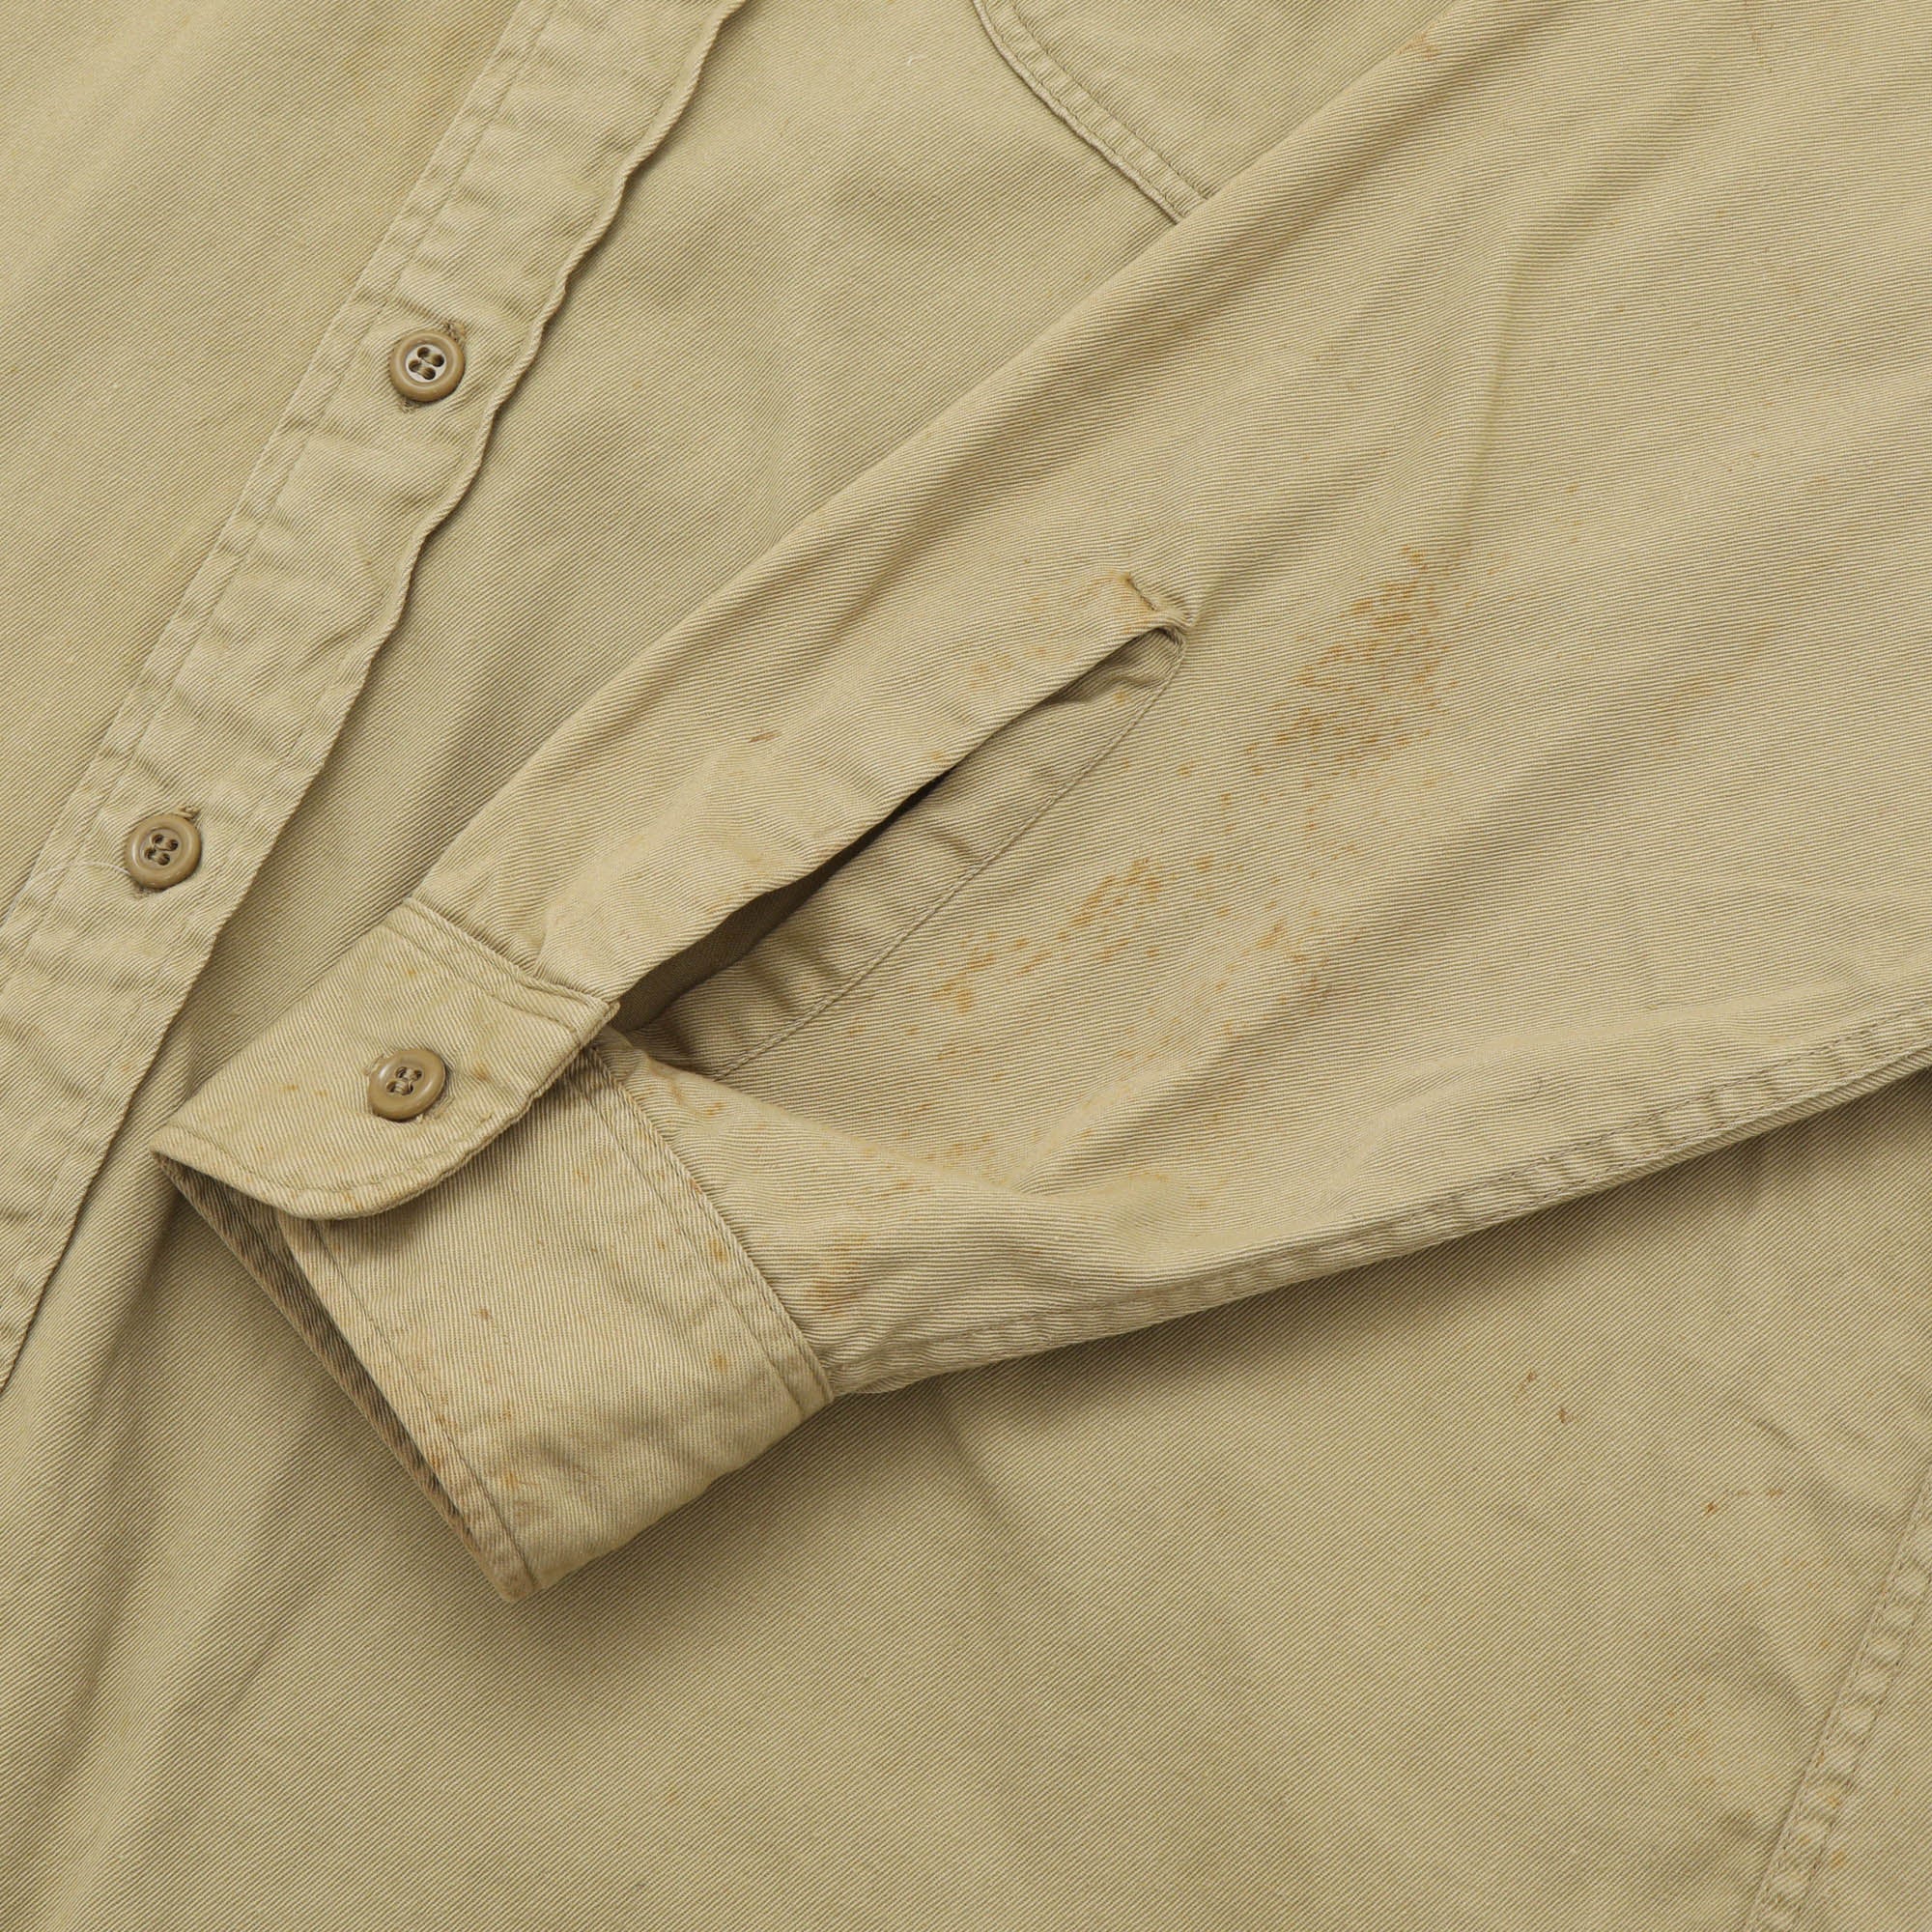 Vintage 60's Clarence Work Shirt